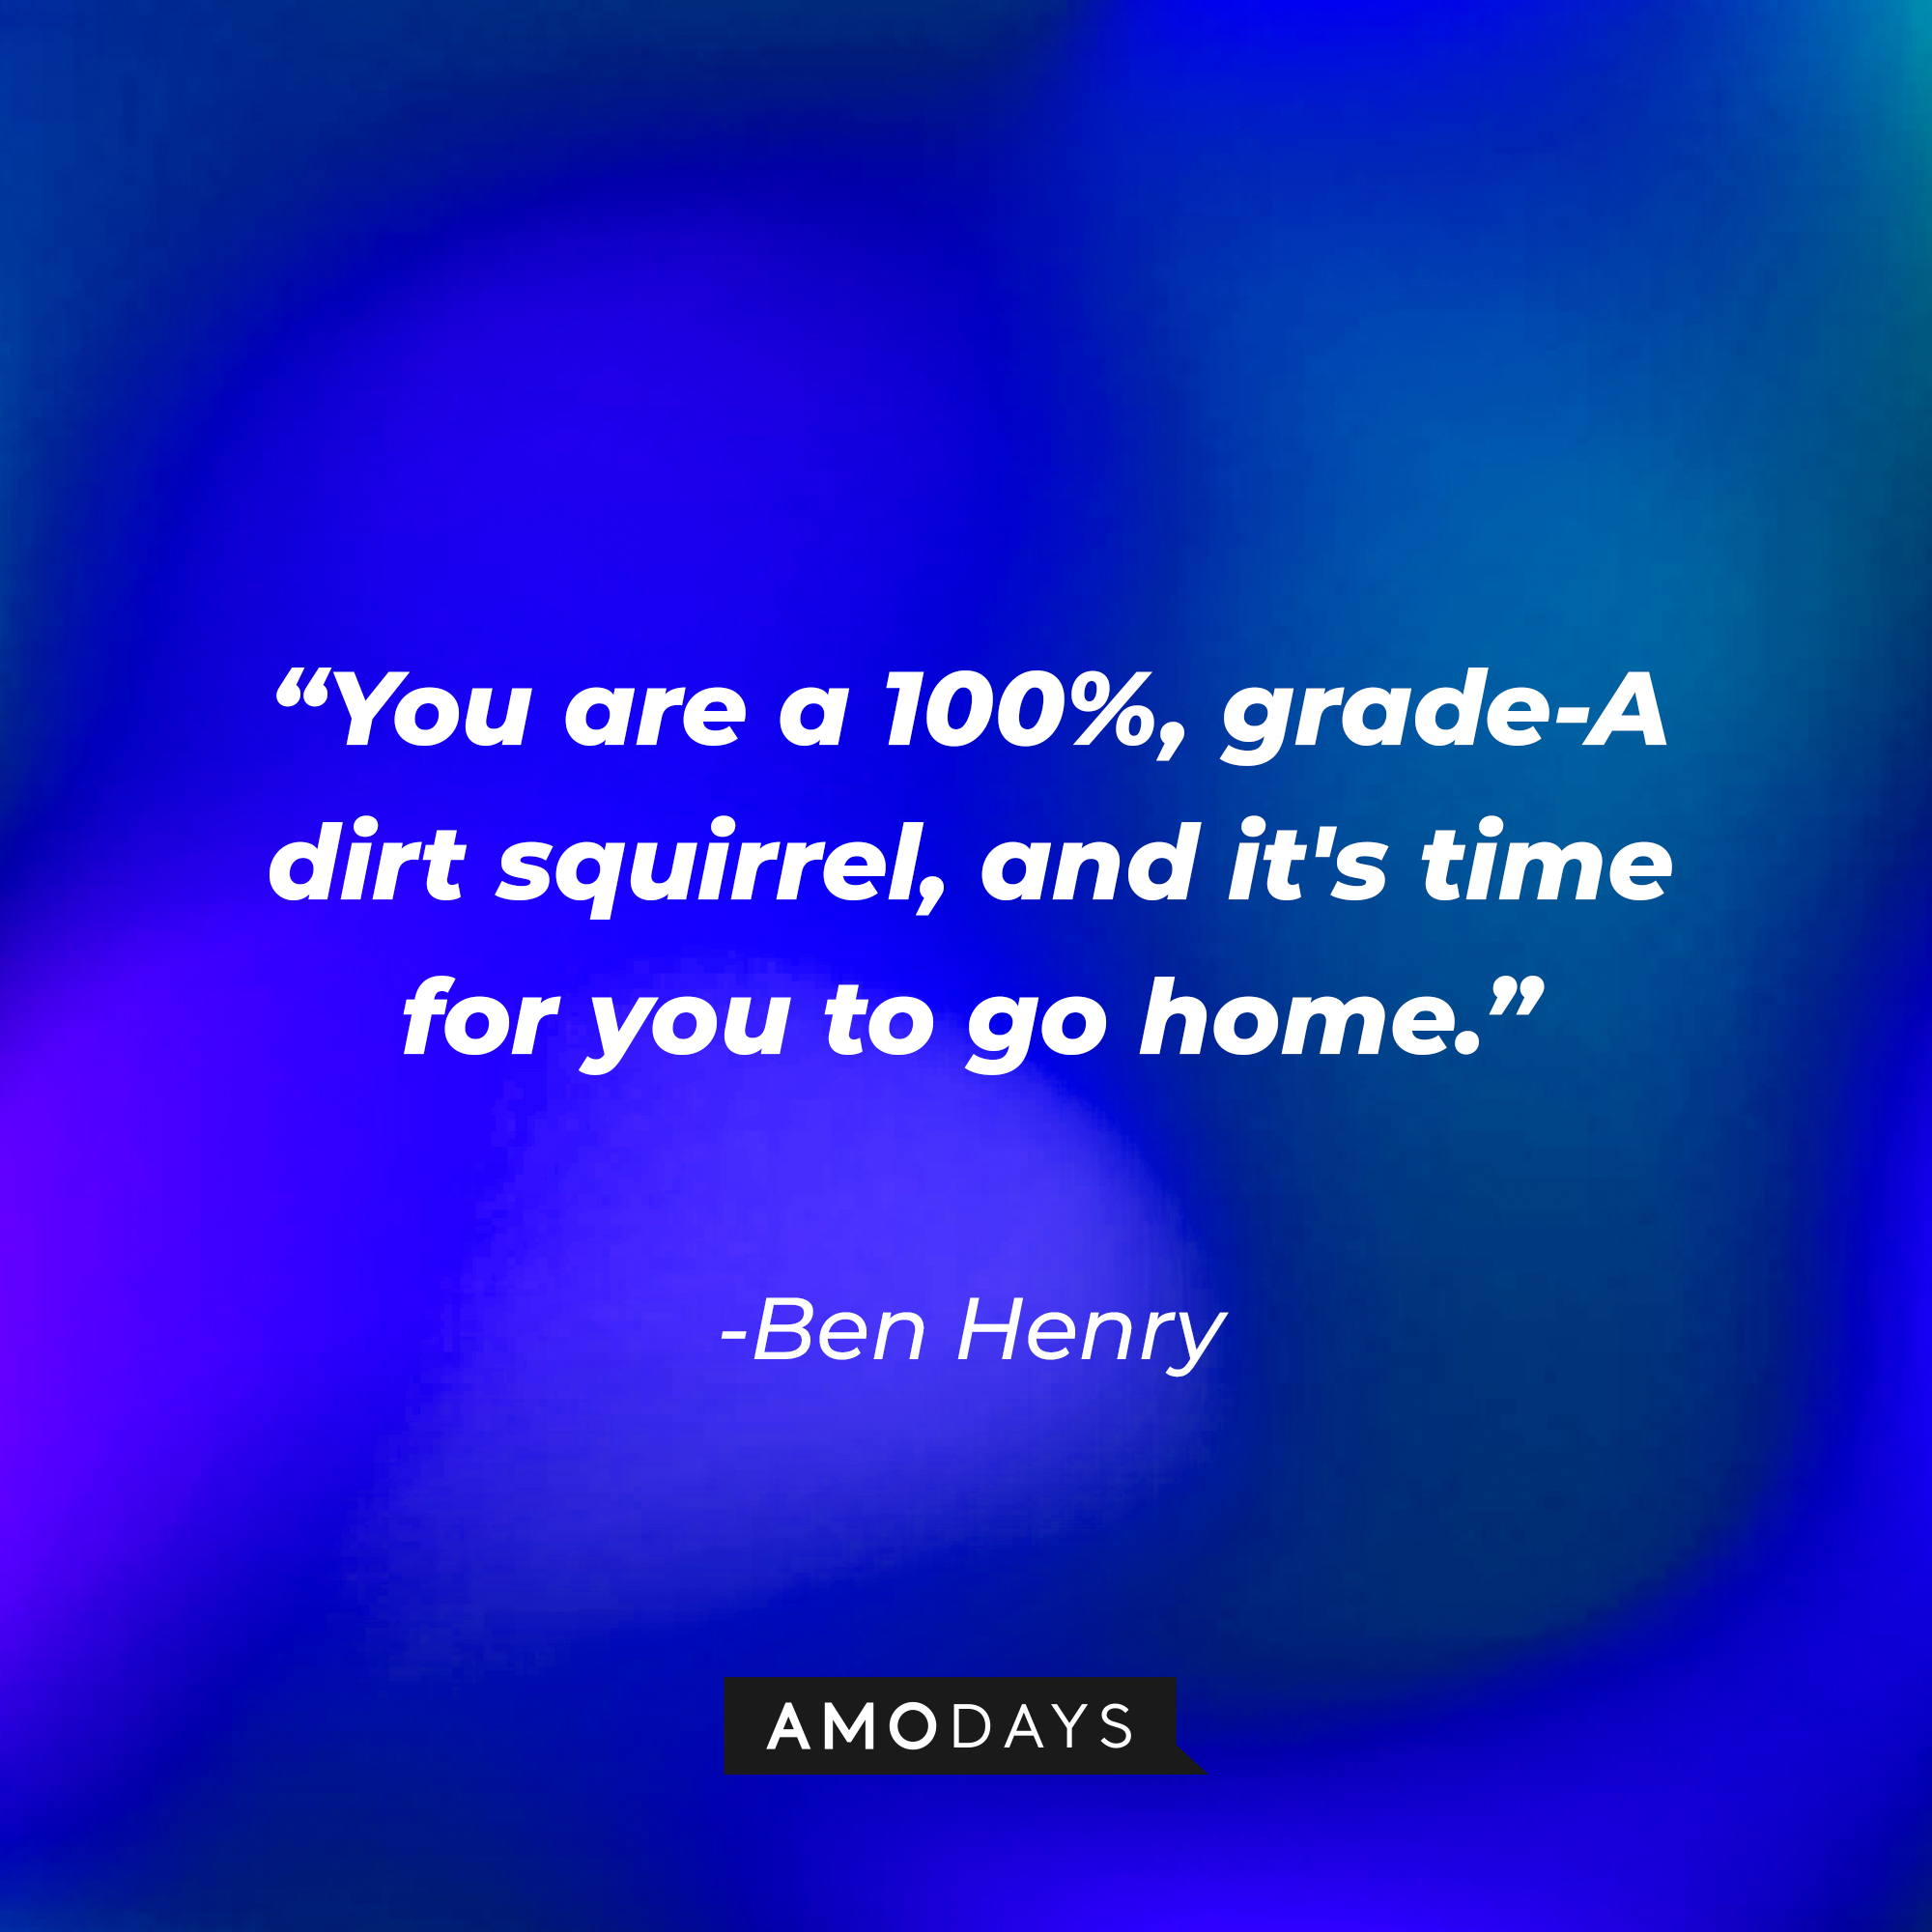 Ben Henry’s quote: "You are a 100%, grade-A dirt squirrel, and it's time for you to go home.” │Source: AmoDays